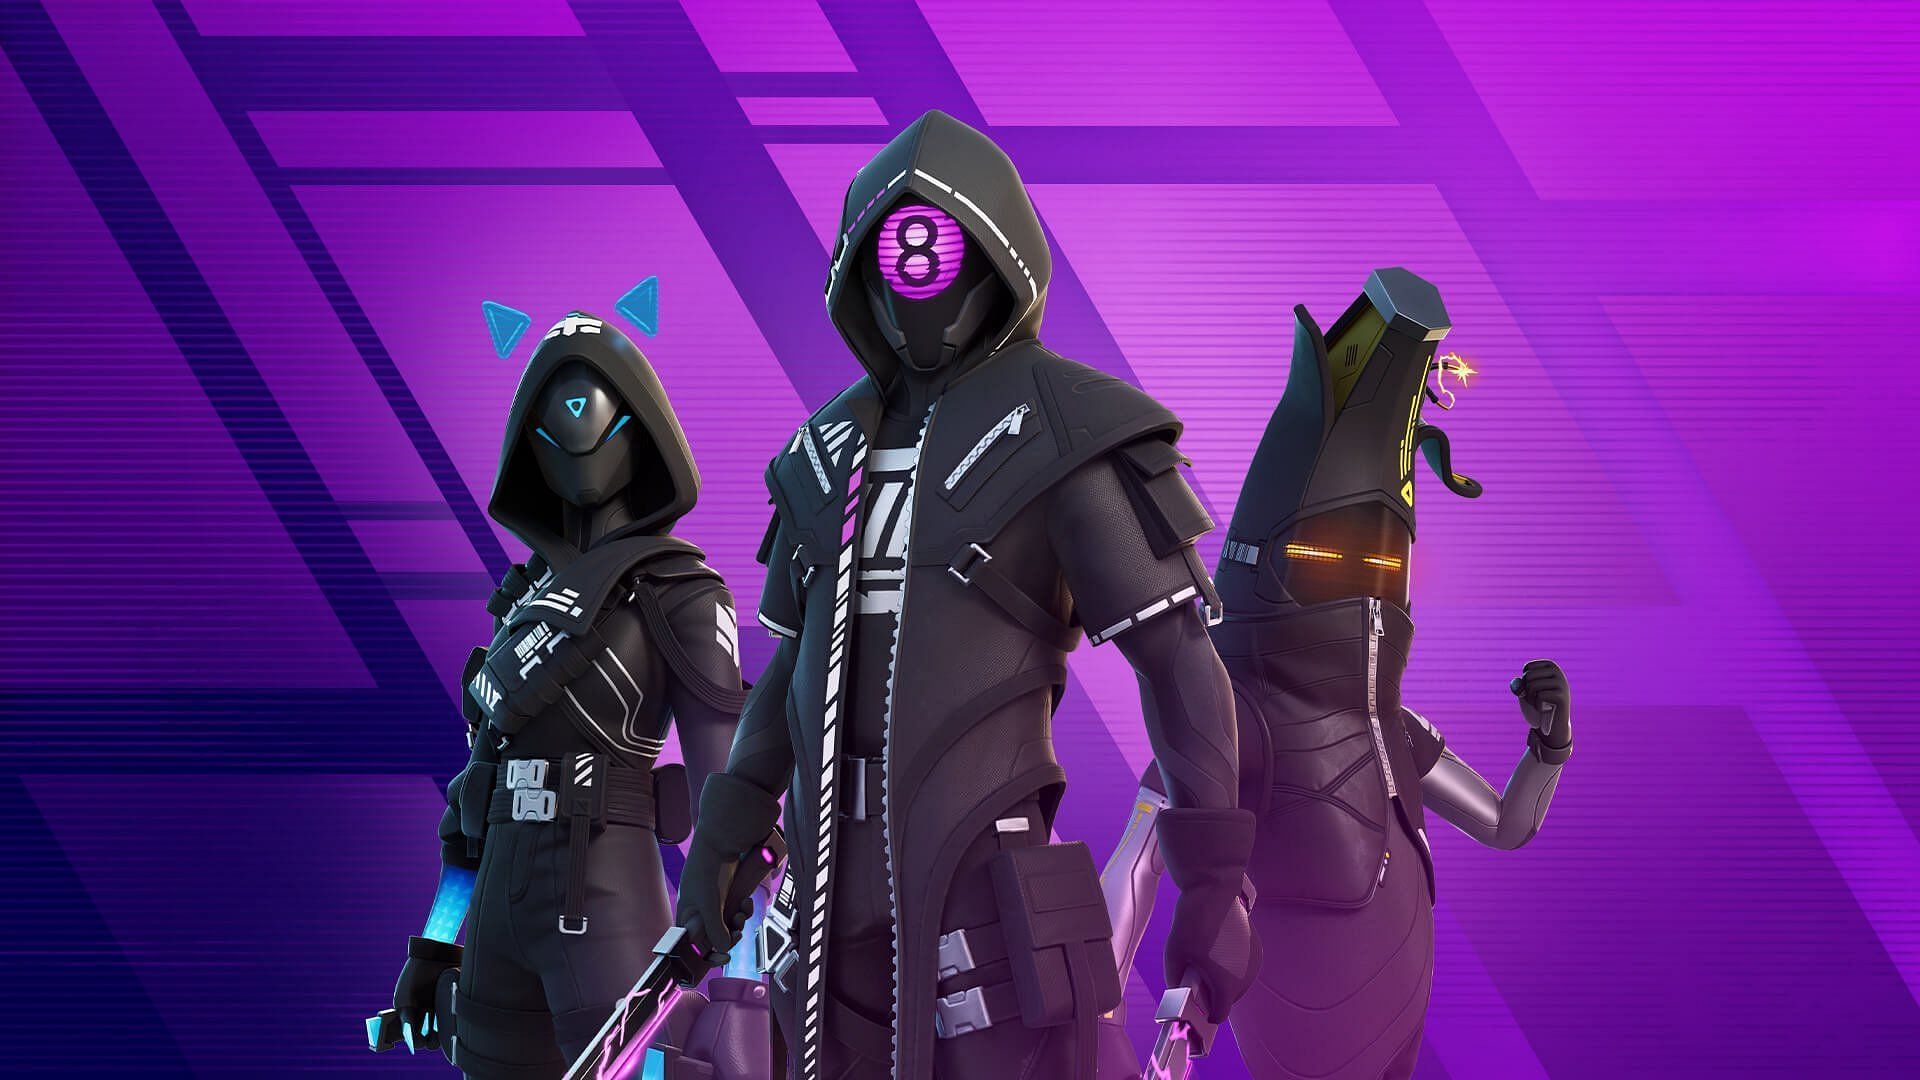 The Fortnite Tech Future Pack is out now for players to obtain in the in-game shop (Image via Epic Games)